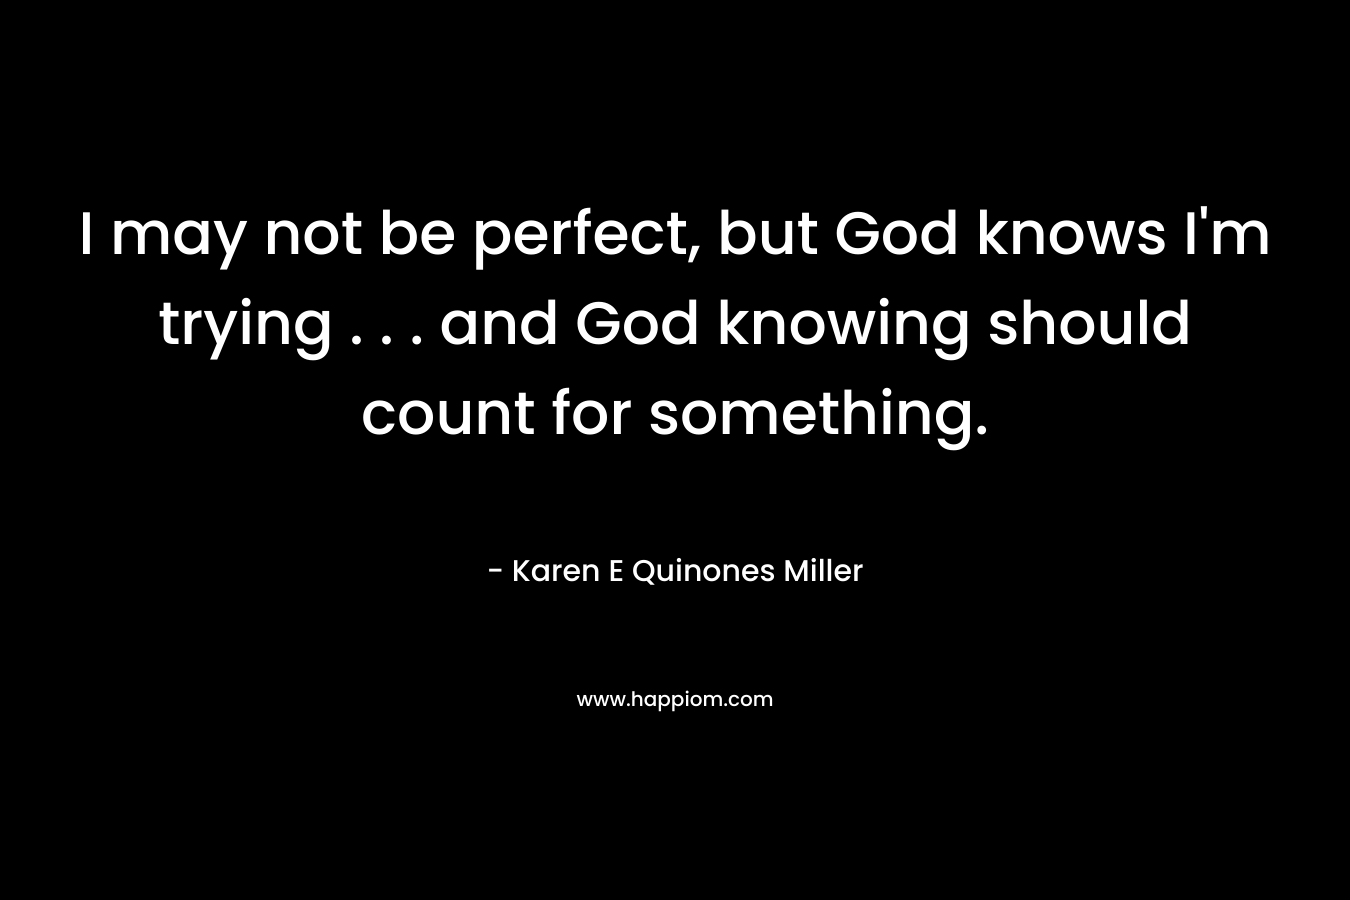 I may not be perfect, but God knows I'm trying . . . and God knowing should count for something.